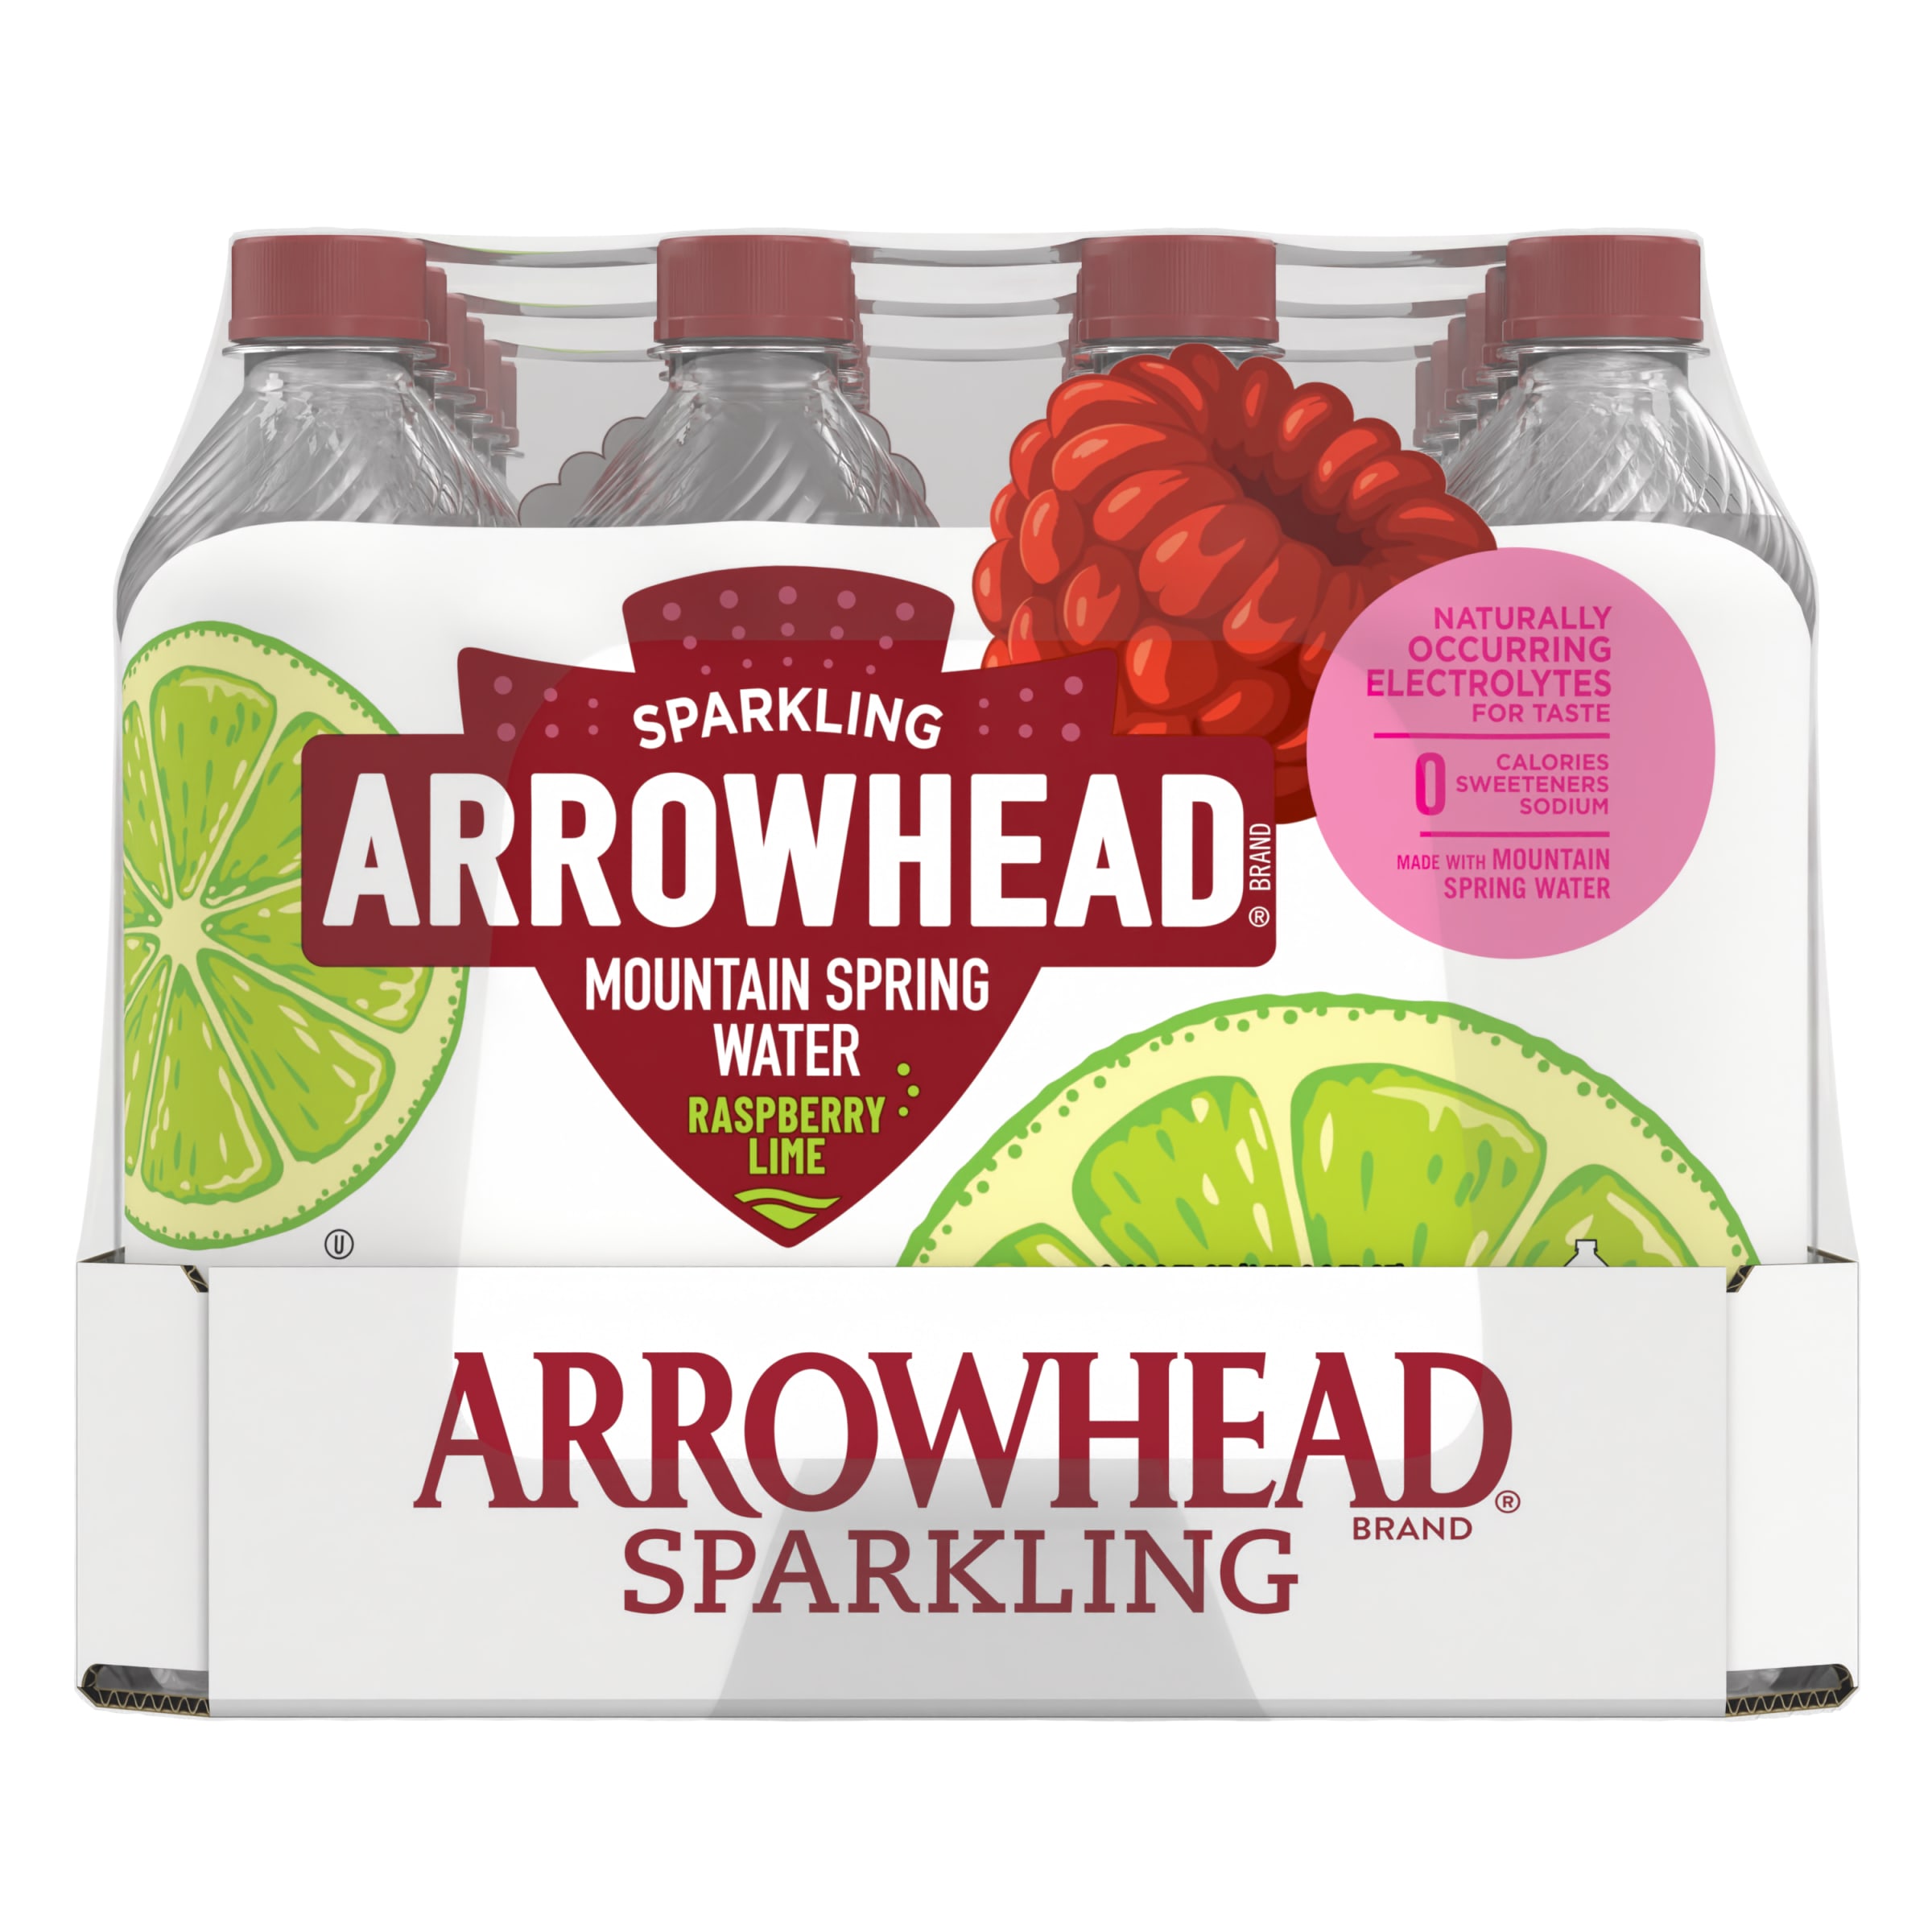 Arrowhead Sparkling Water, Raspberry Lime, 16.9 oz. Bottles (24 Count) - image 4 of 6